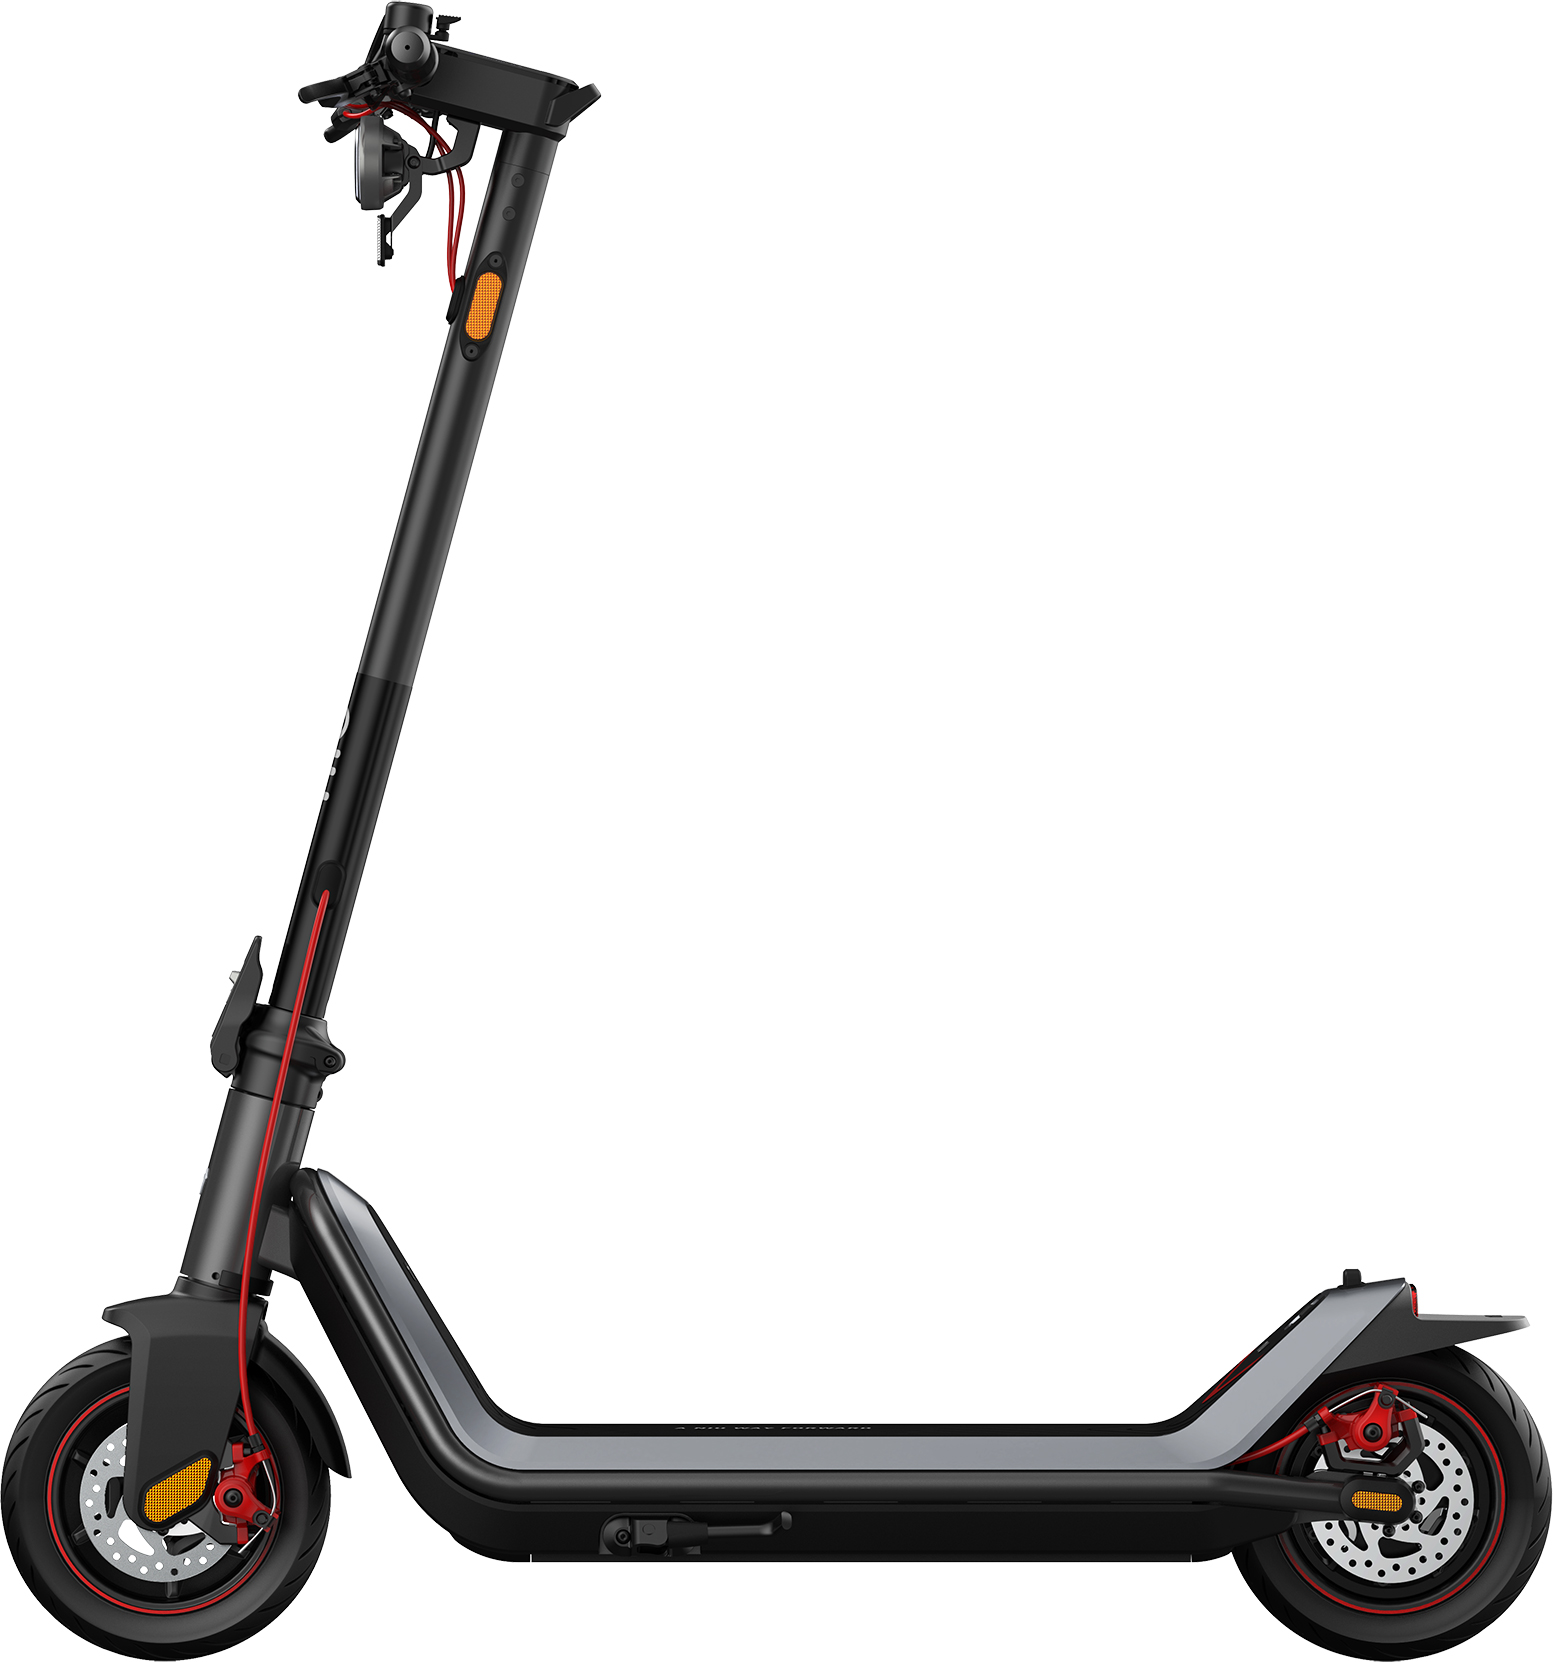 NIU KQi3 Max Electric Scooter 40.4 Miles Long Range Upgraded Motor Power Max Speed 20 mph Portable Foldable Commuting - image 1 of 18